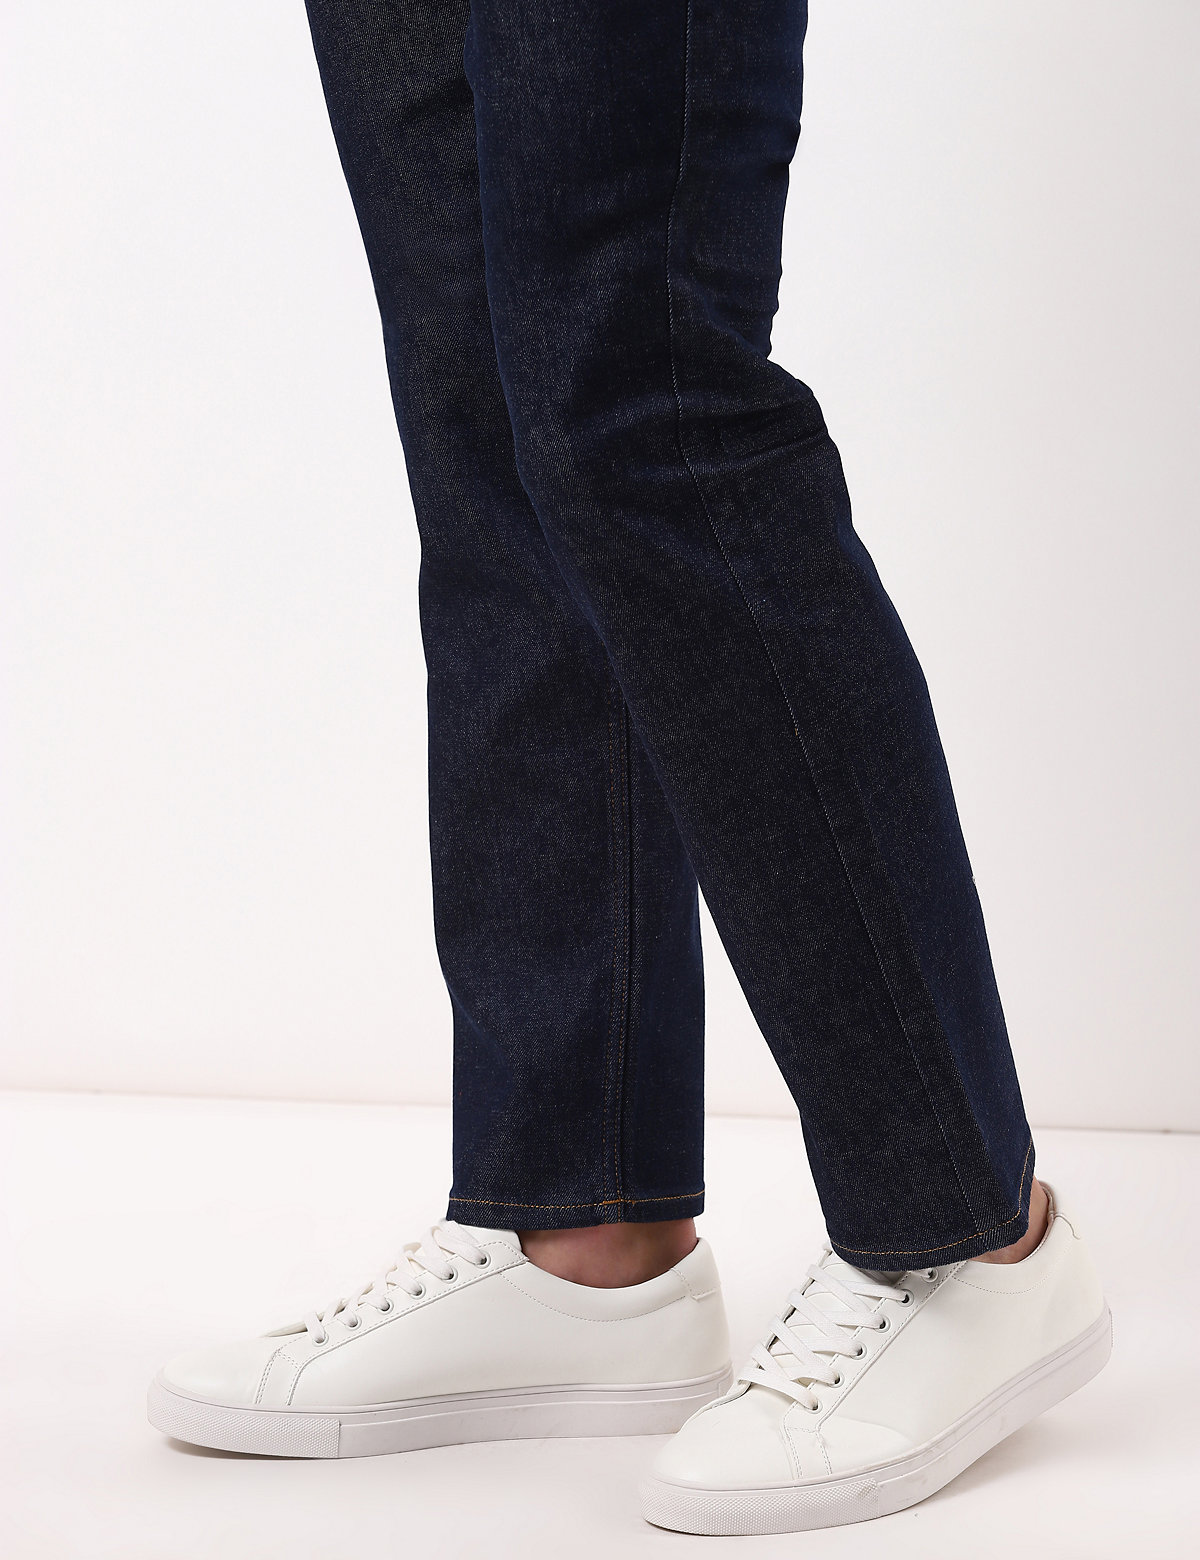 Straight Fit Cross Pkt Jeans